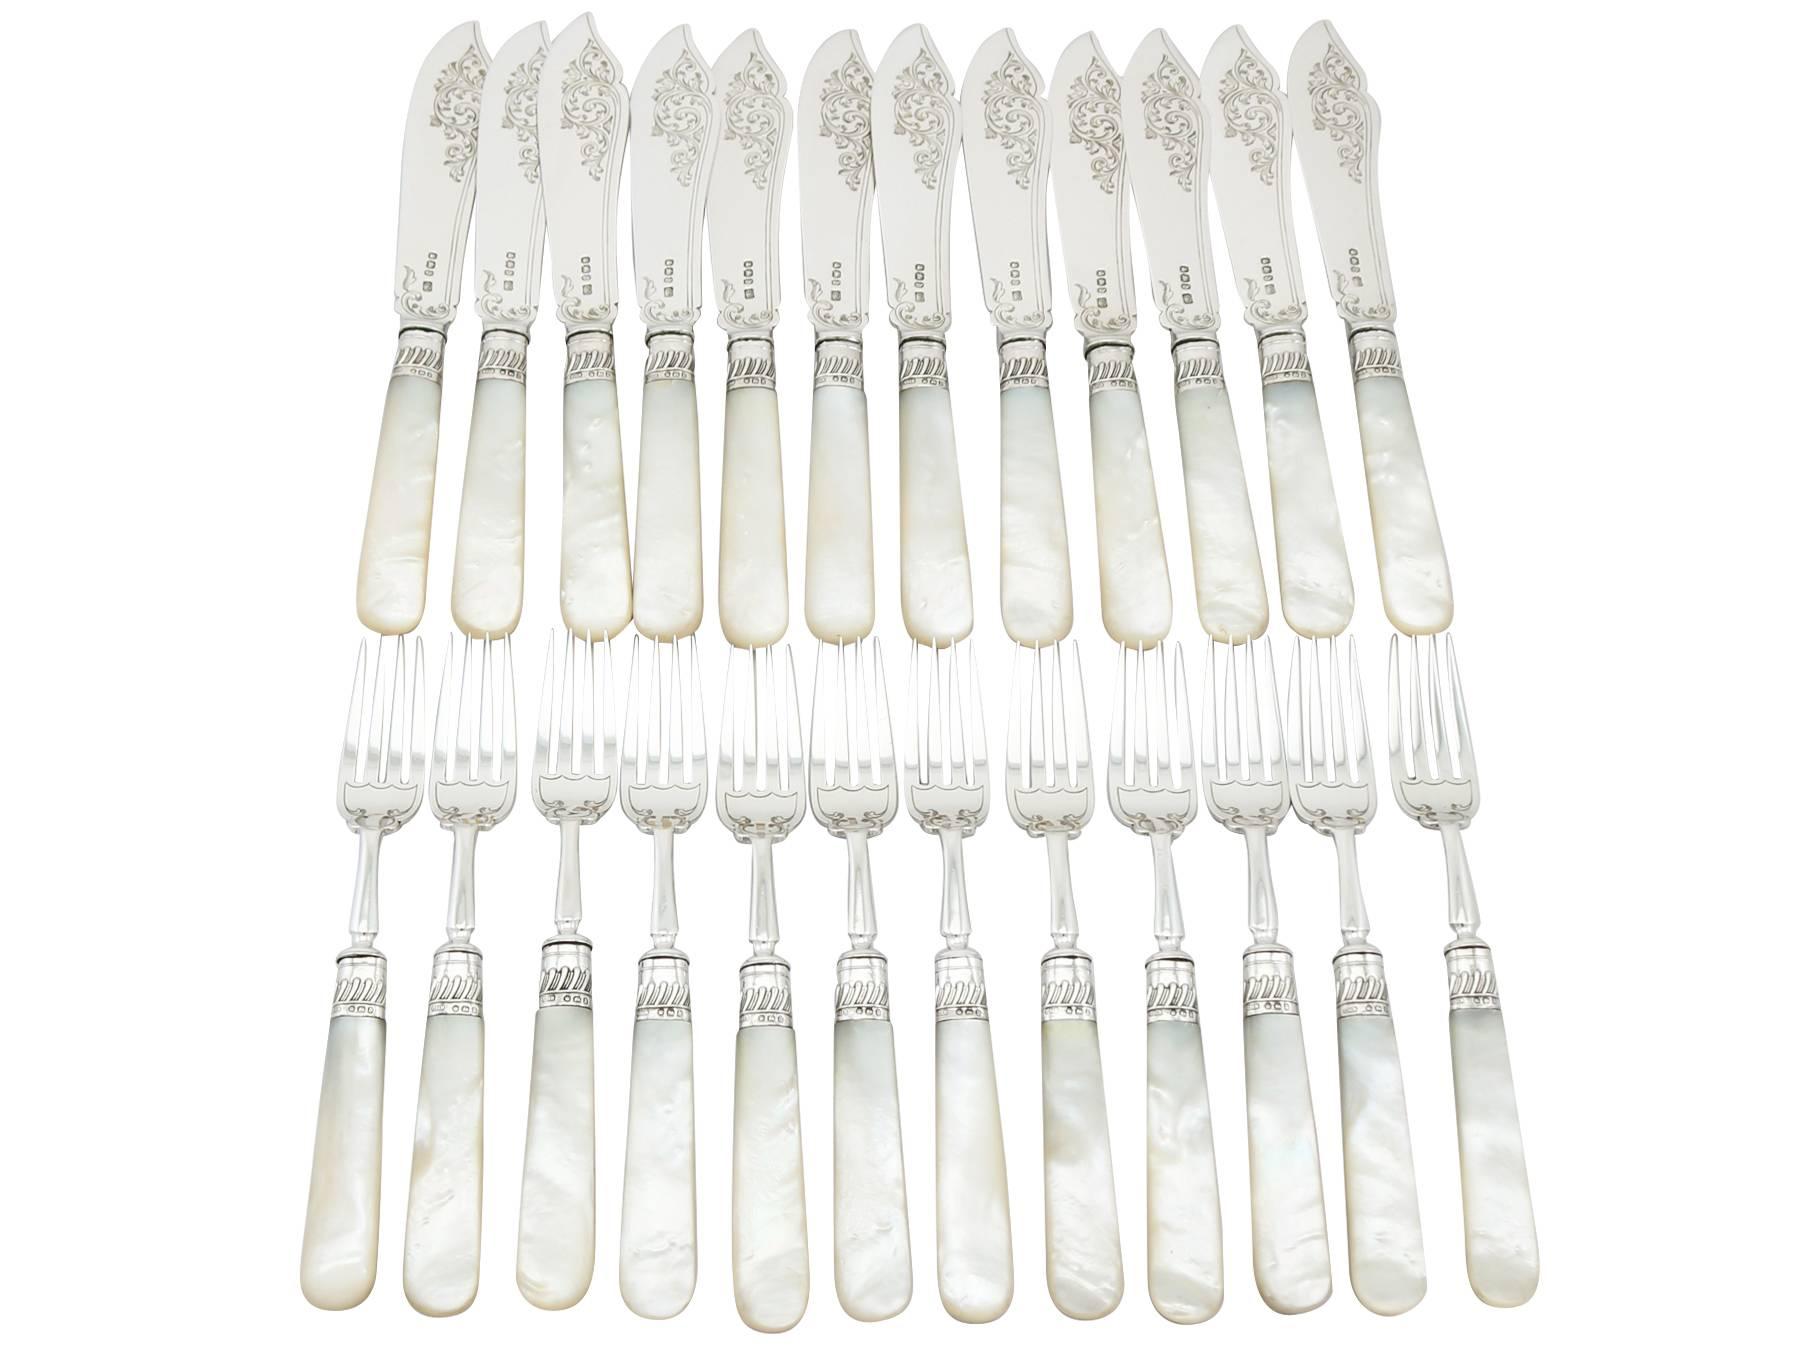 An exceptional, fine and impressive antique Victorian English sterling silver and mother-of-pearl handled fish service for twelve persons; an addition to our silver flatware collection

This exceptional antique Victorian sterling silver fish